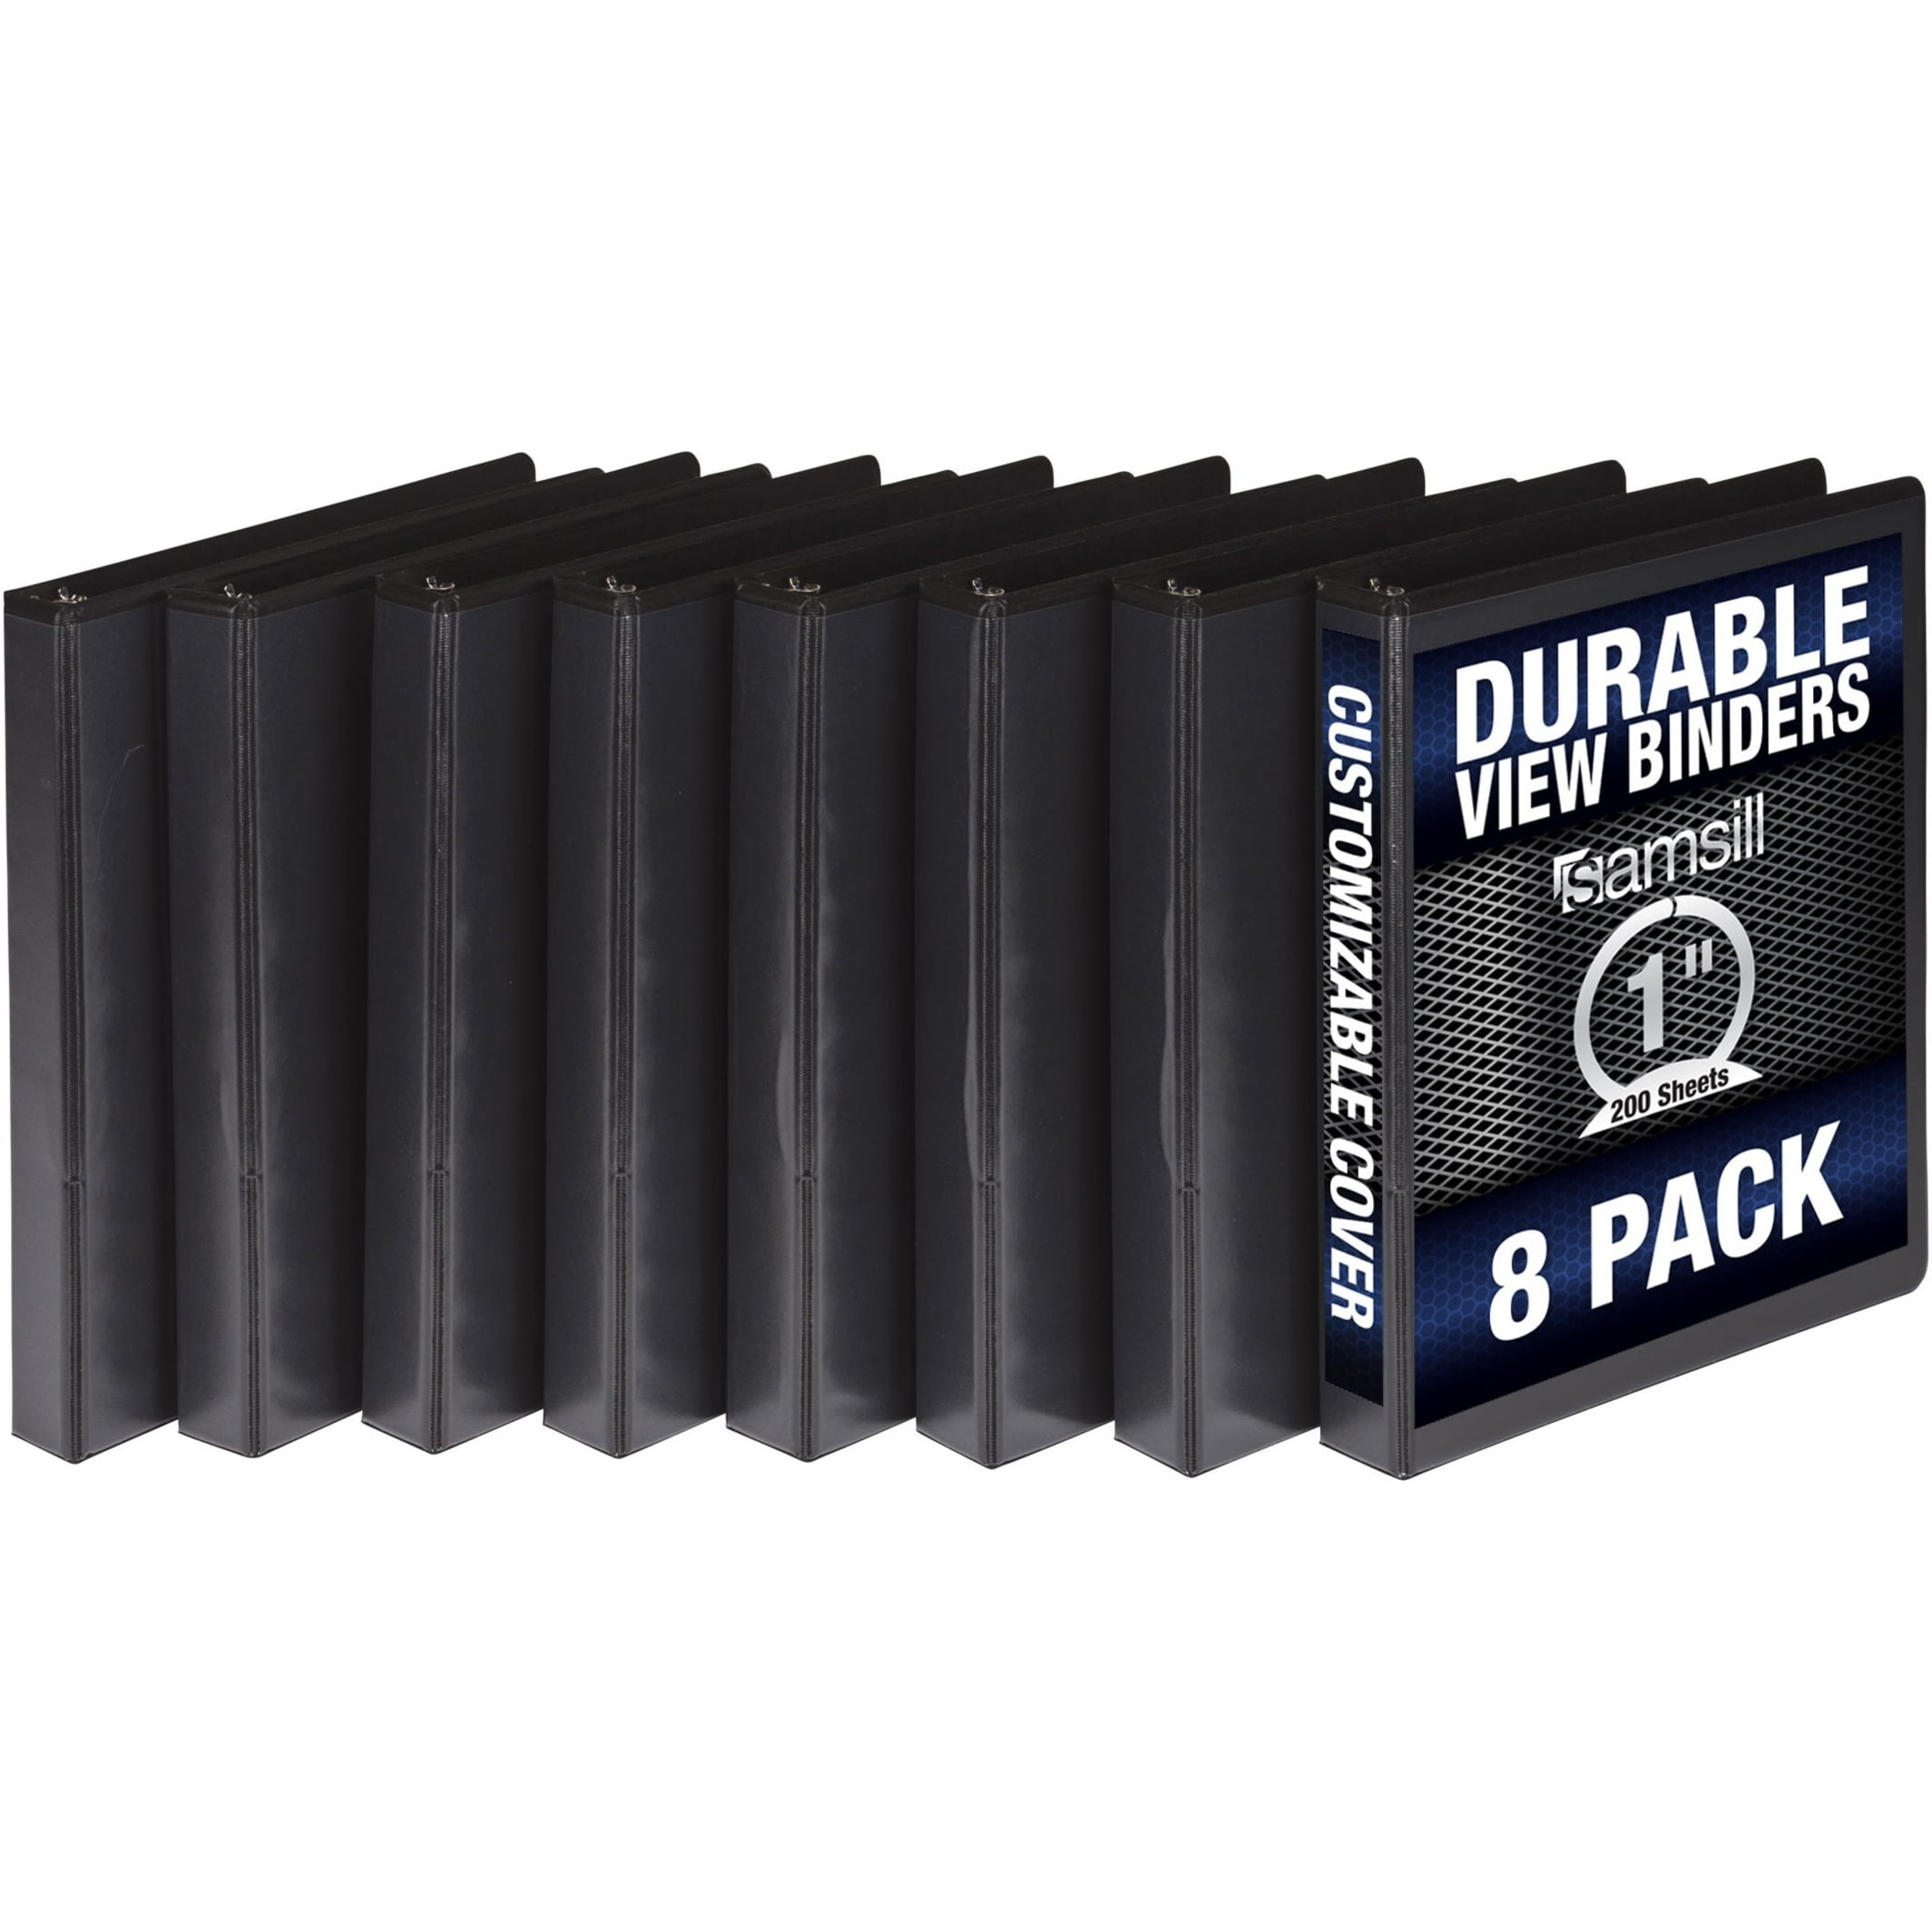 S88430 1 In. Economy Durable View Binder - Black, Pack Of 8